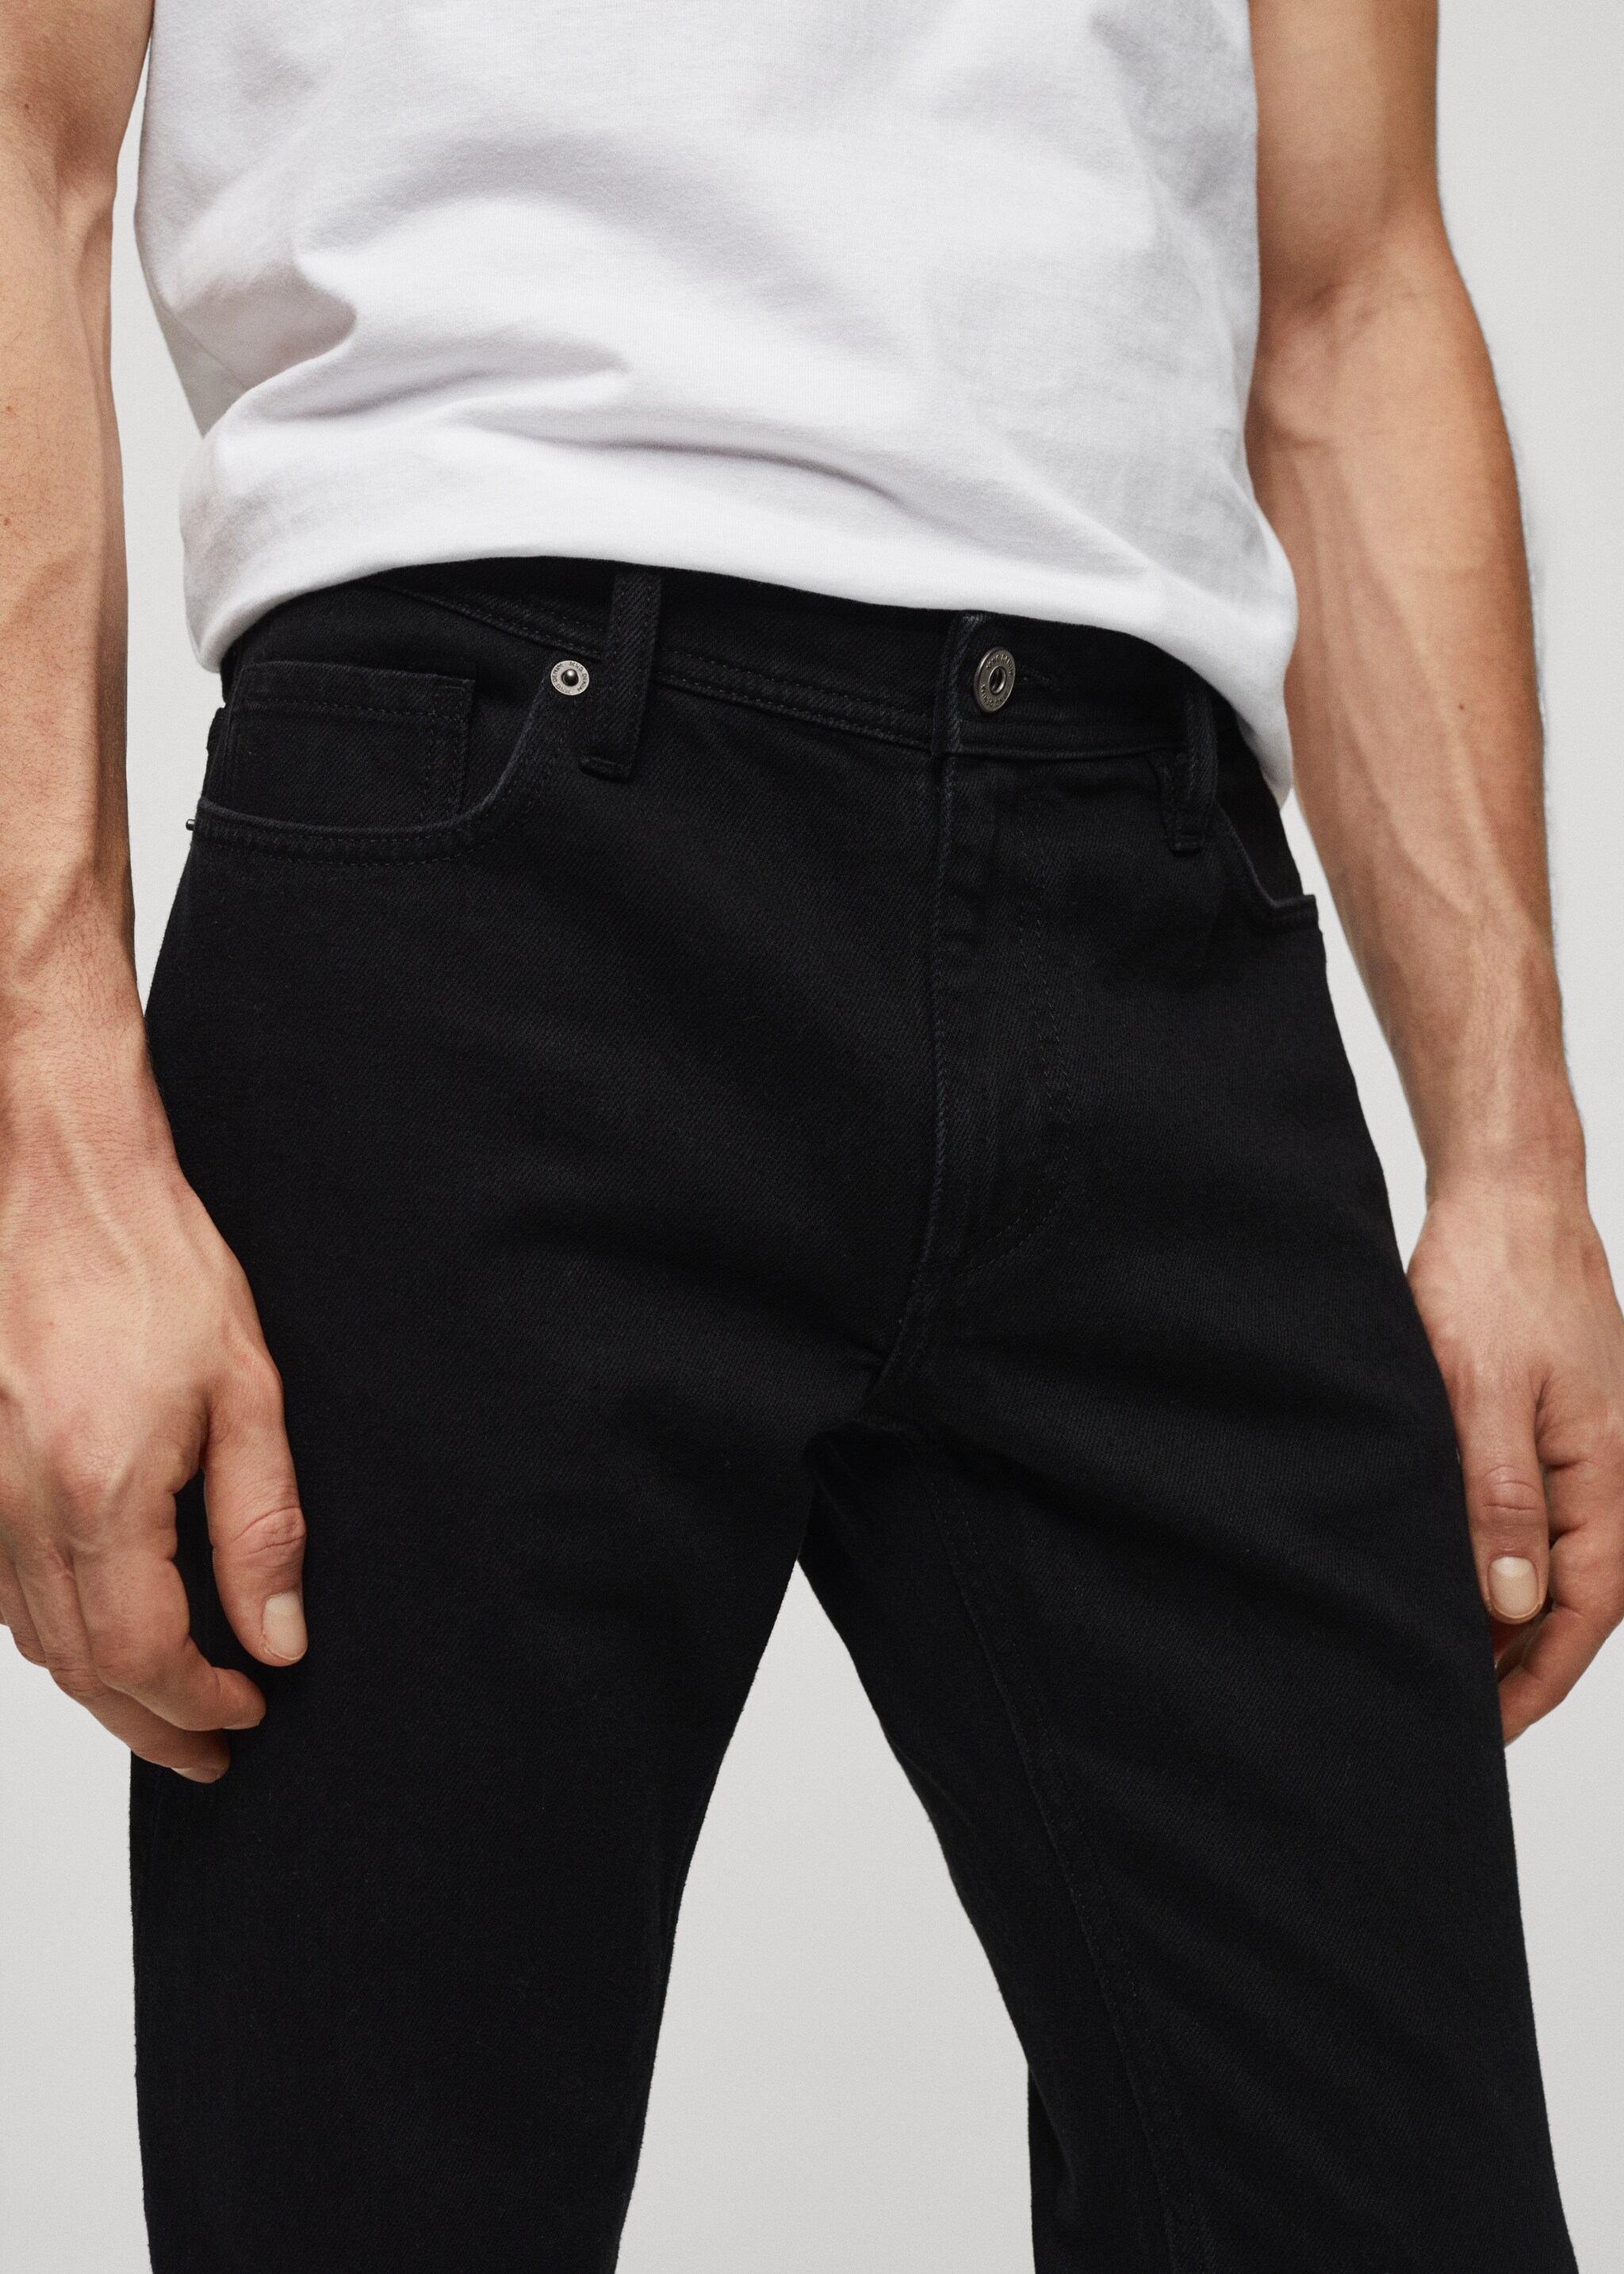 Jan slim-fit jeans - Details of the article 1